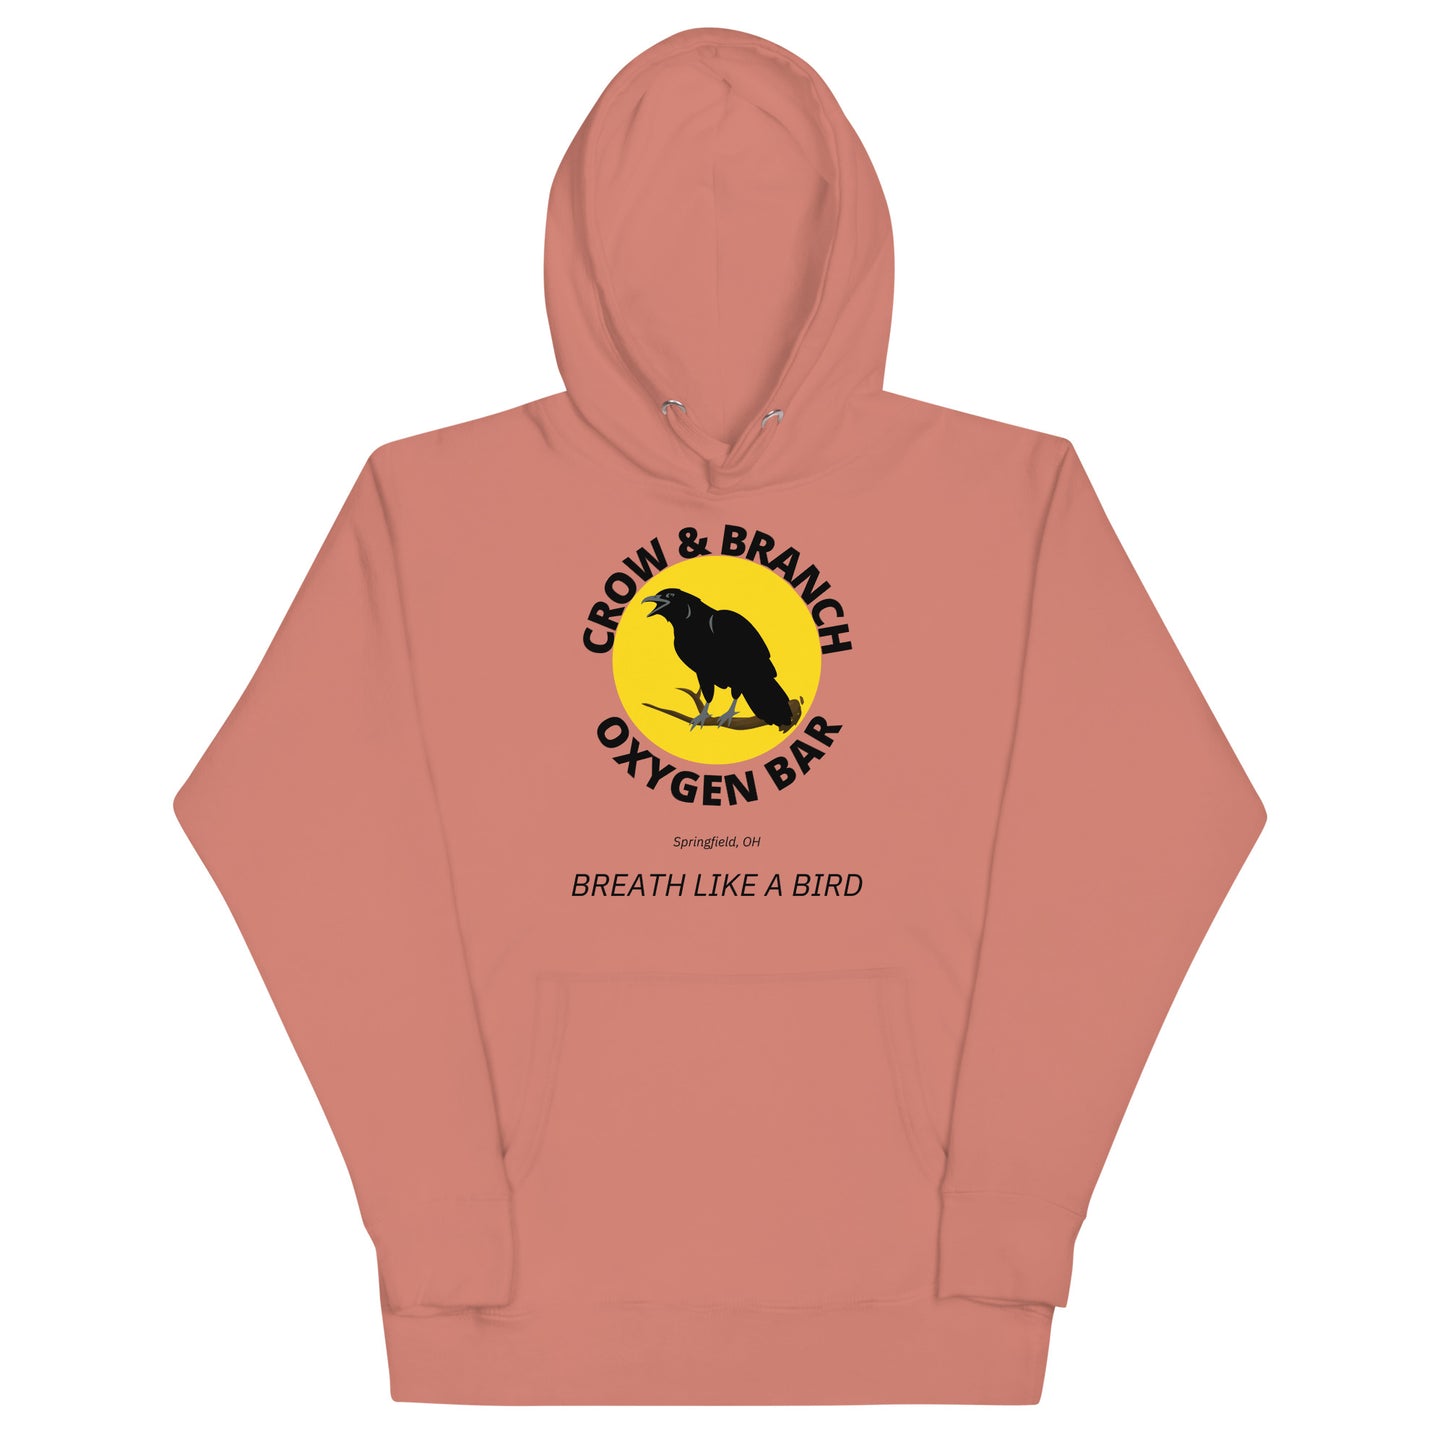 Crow and Branch Hoodie